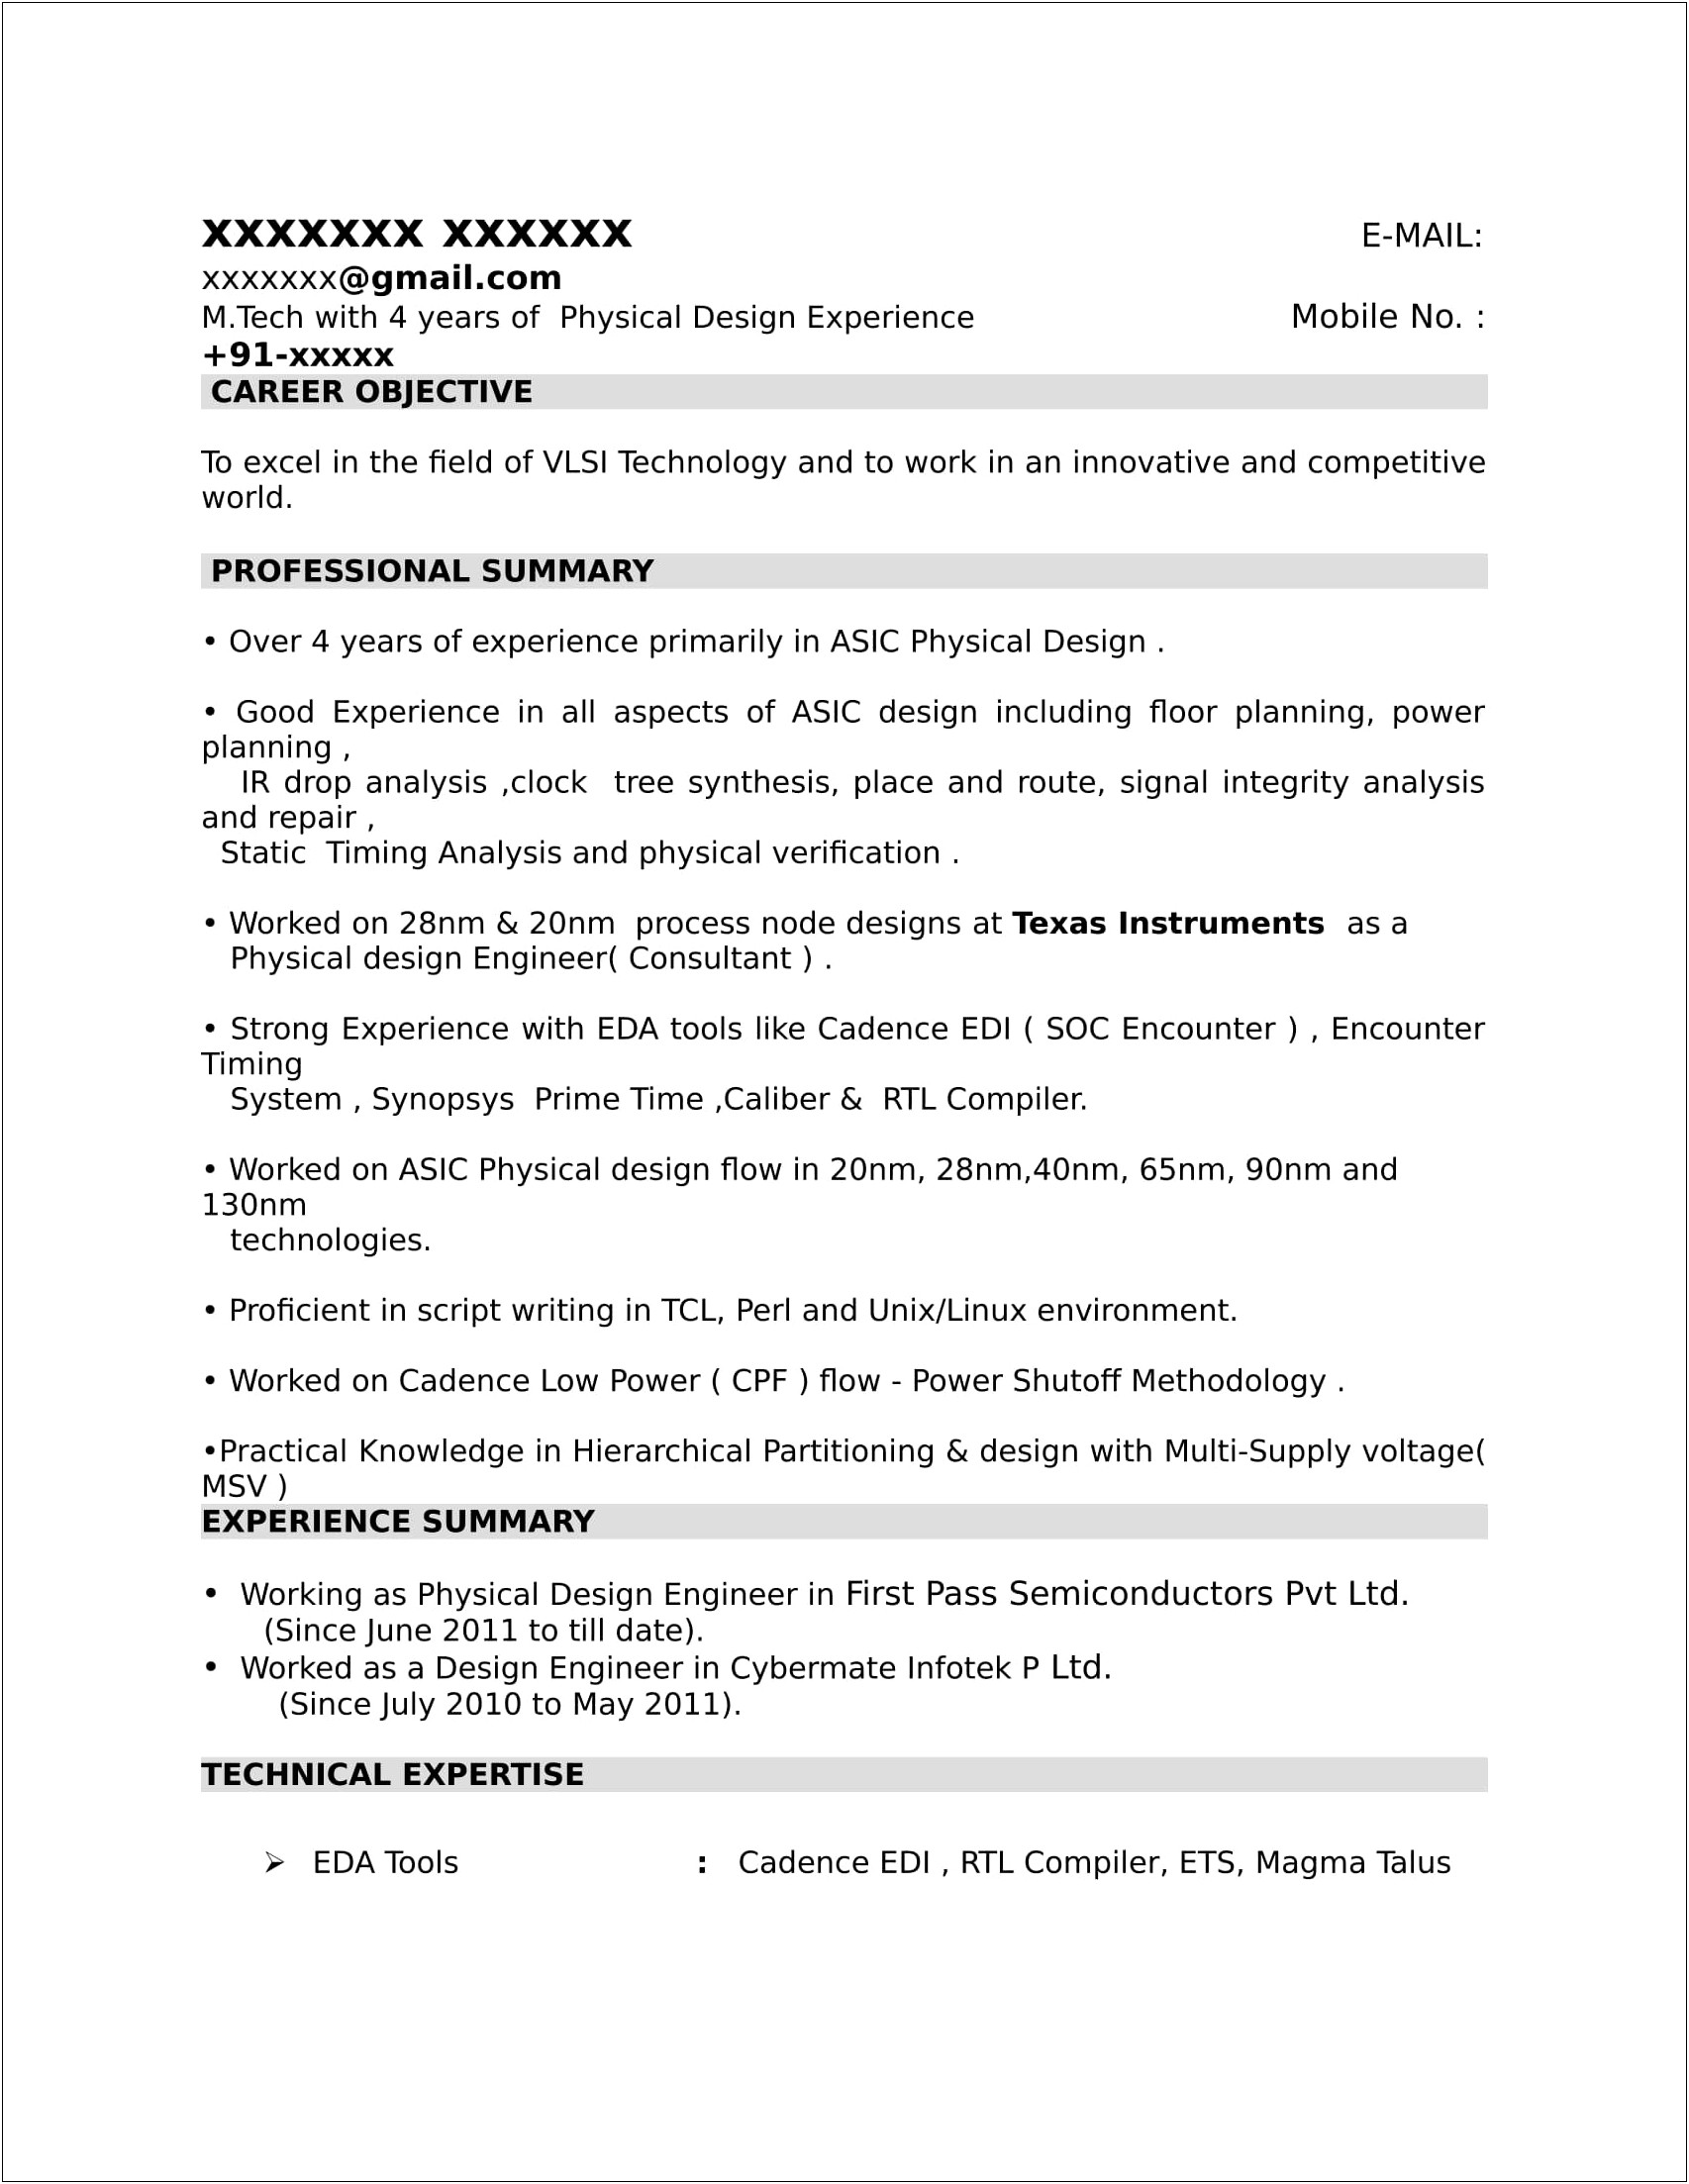 Career Objective For Resume For M Tech